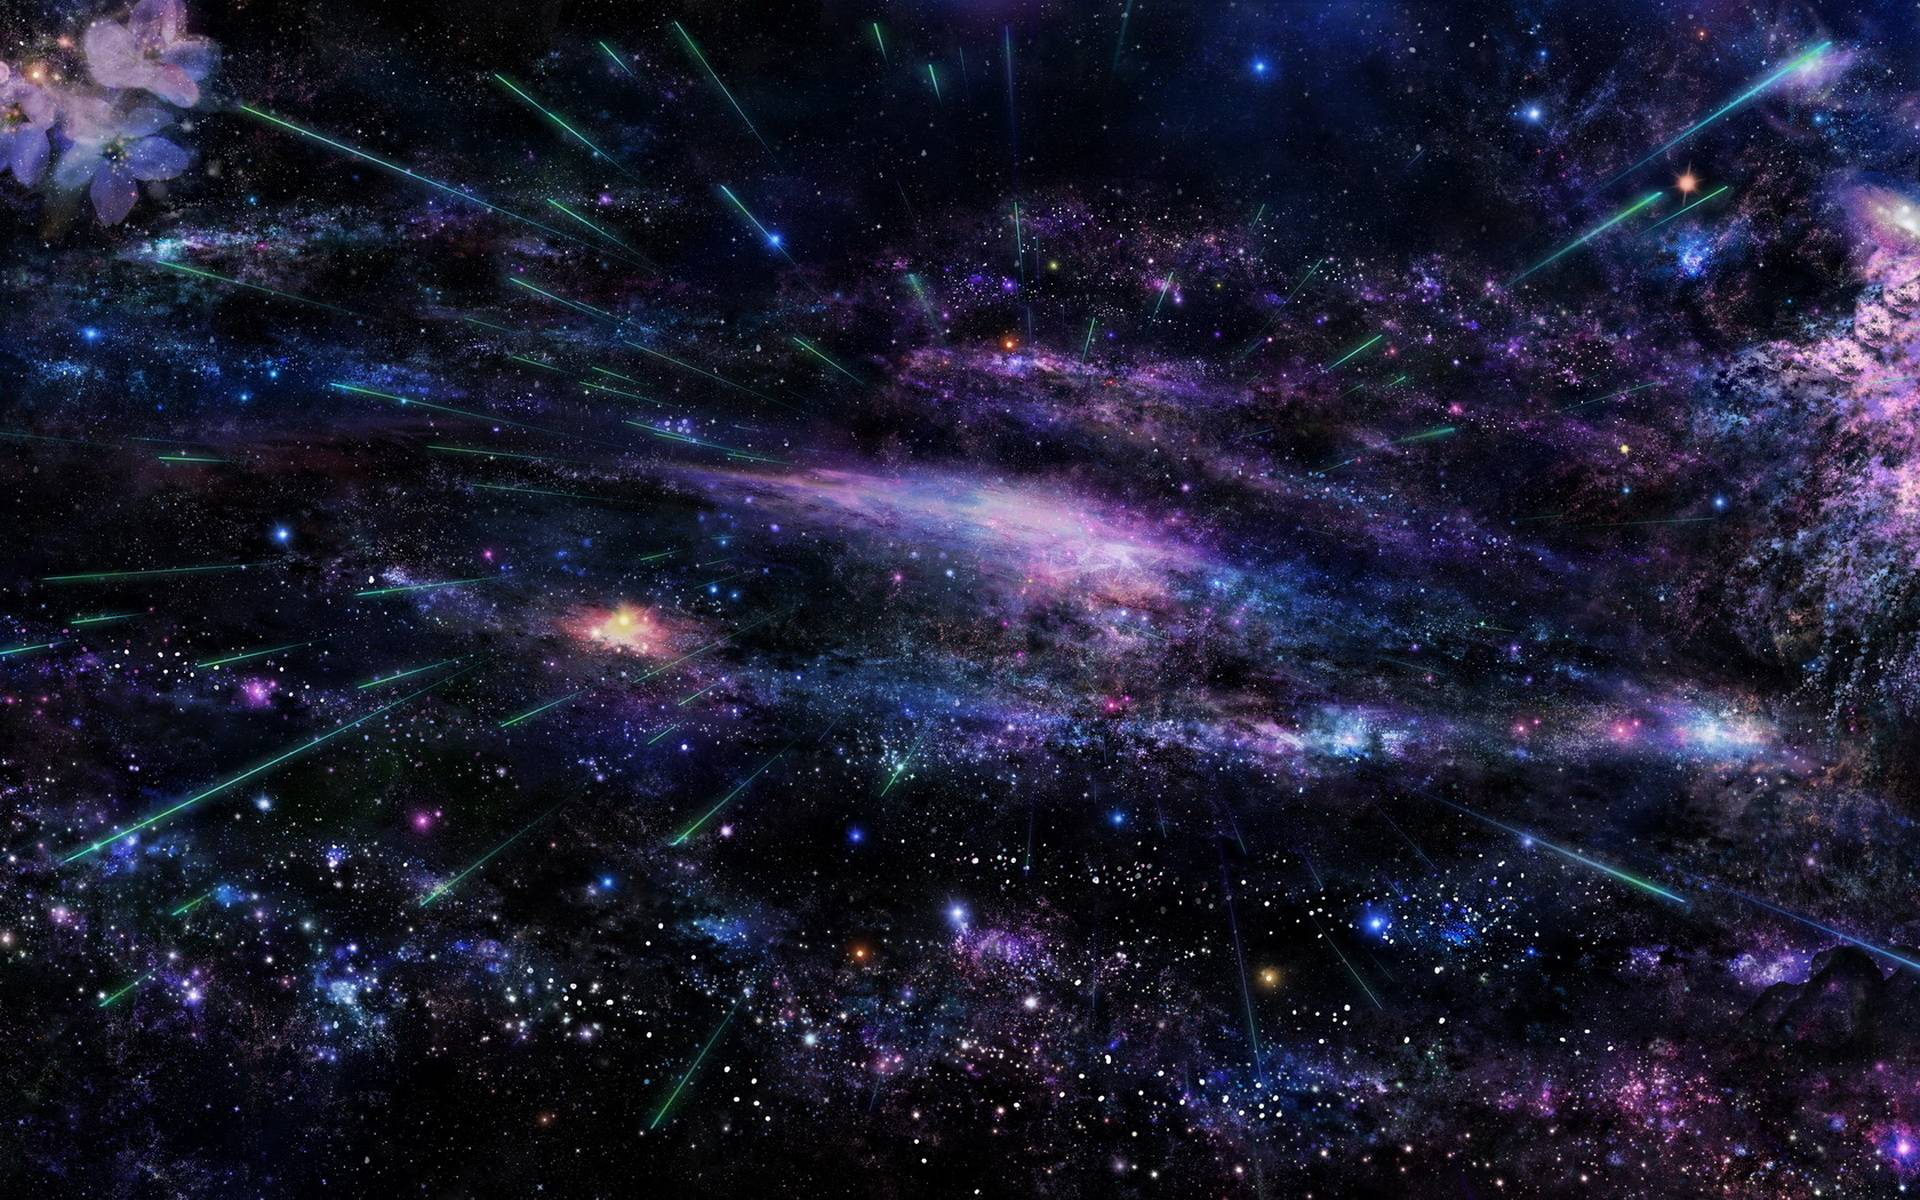 Free HD Universe Background For Desktops, Laptops and Tablets